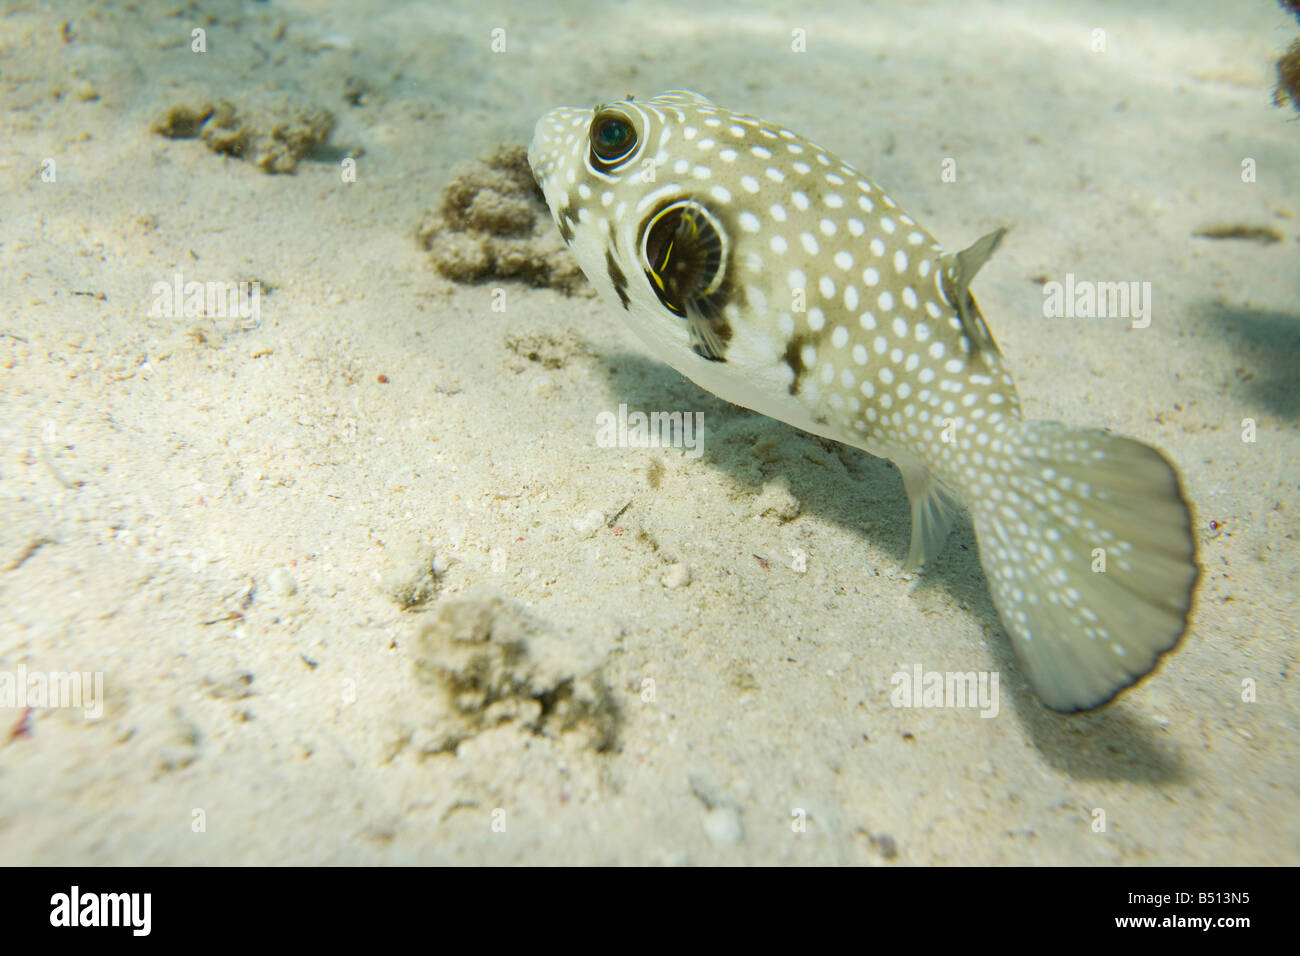 A White Spotted Puffer fish Arothron hispidus in the Red sea off Egypt Stock Photo